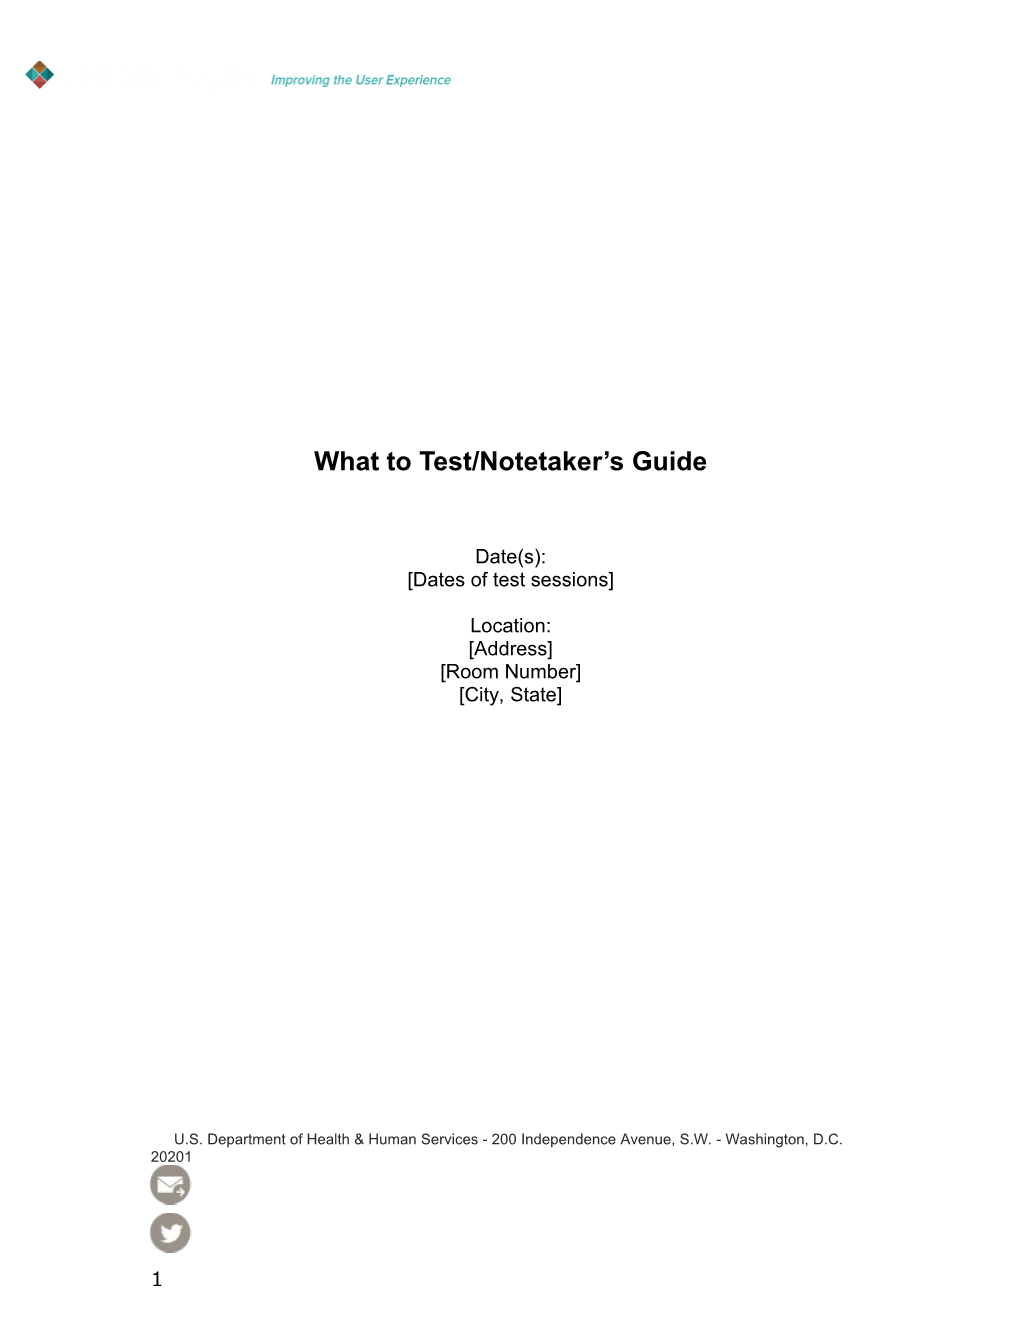 What to Test / Notetaker's Guide